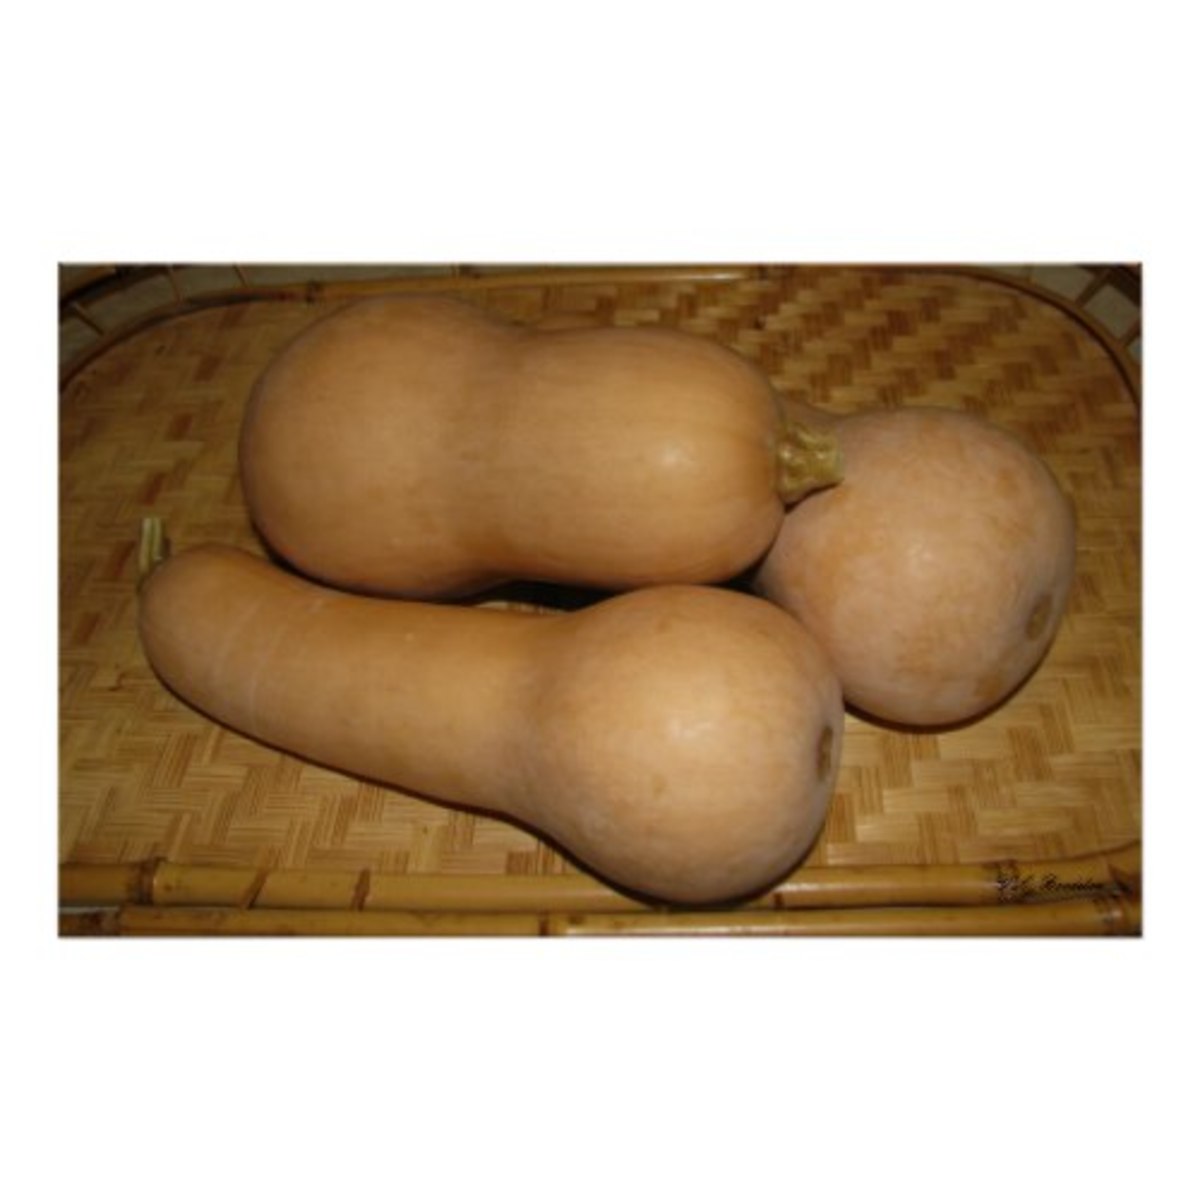 Ripe butternuts are full and firm. The skin is medium tan. Butternut Squash Print by lalagniappe on Zazzle.